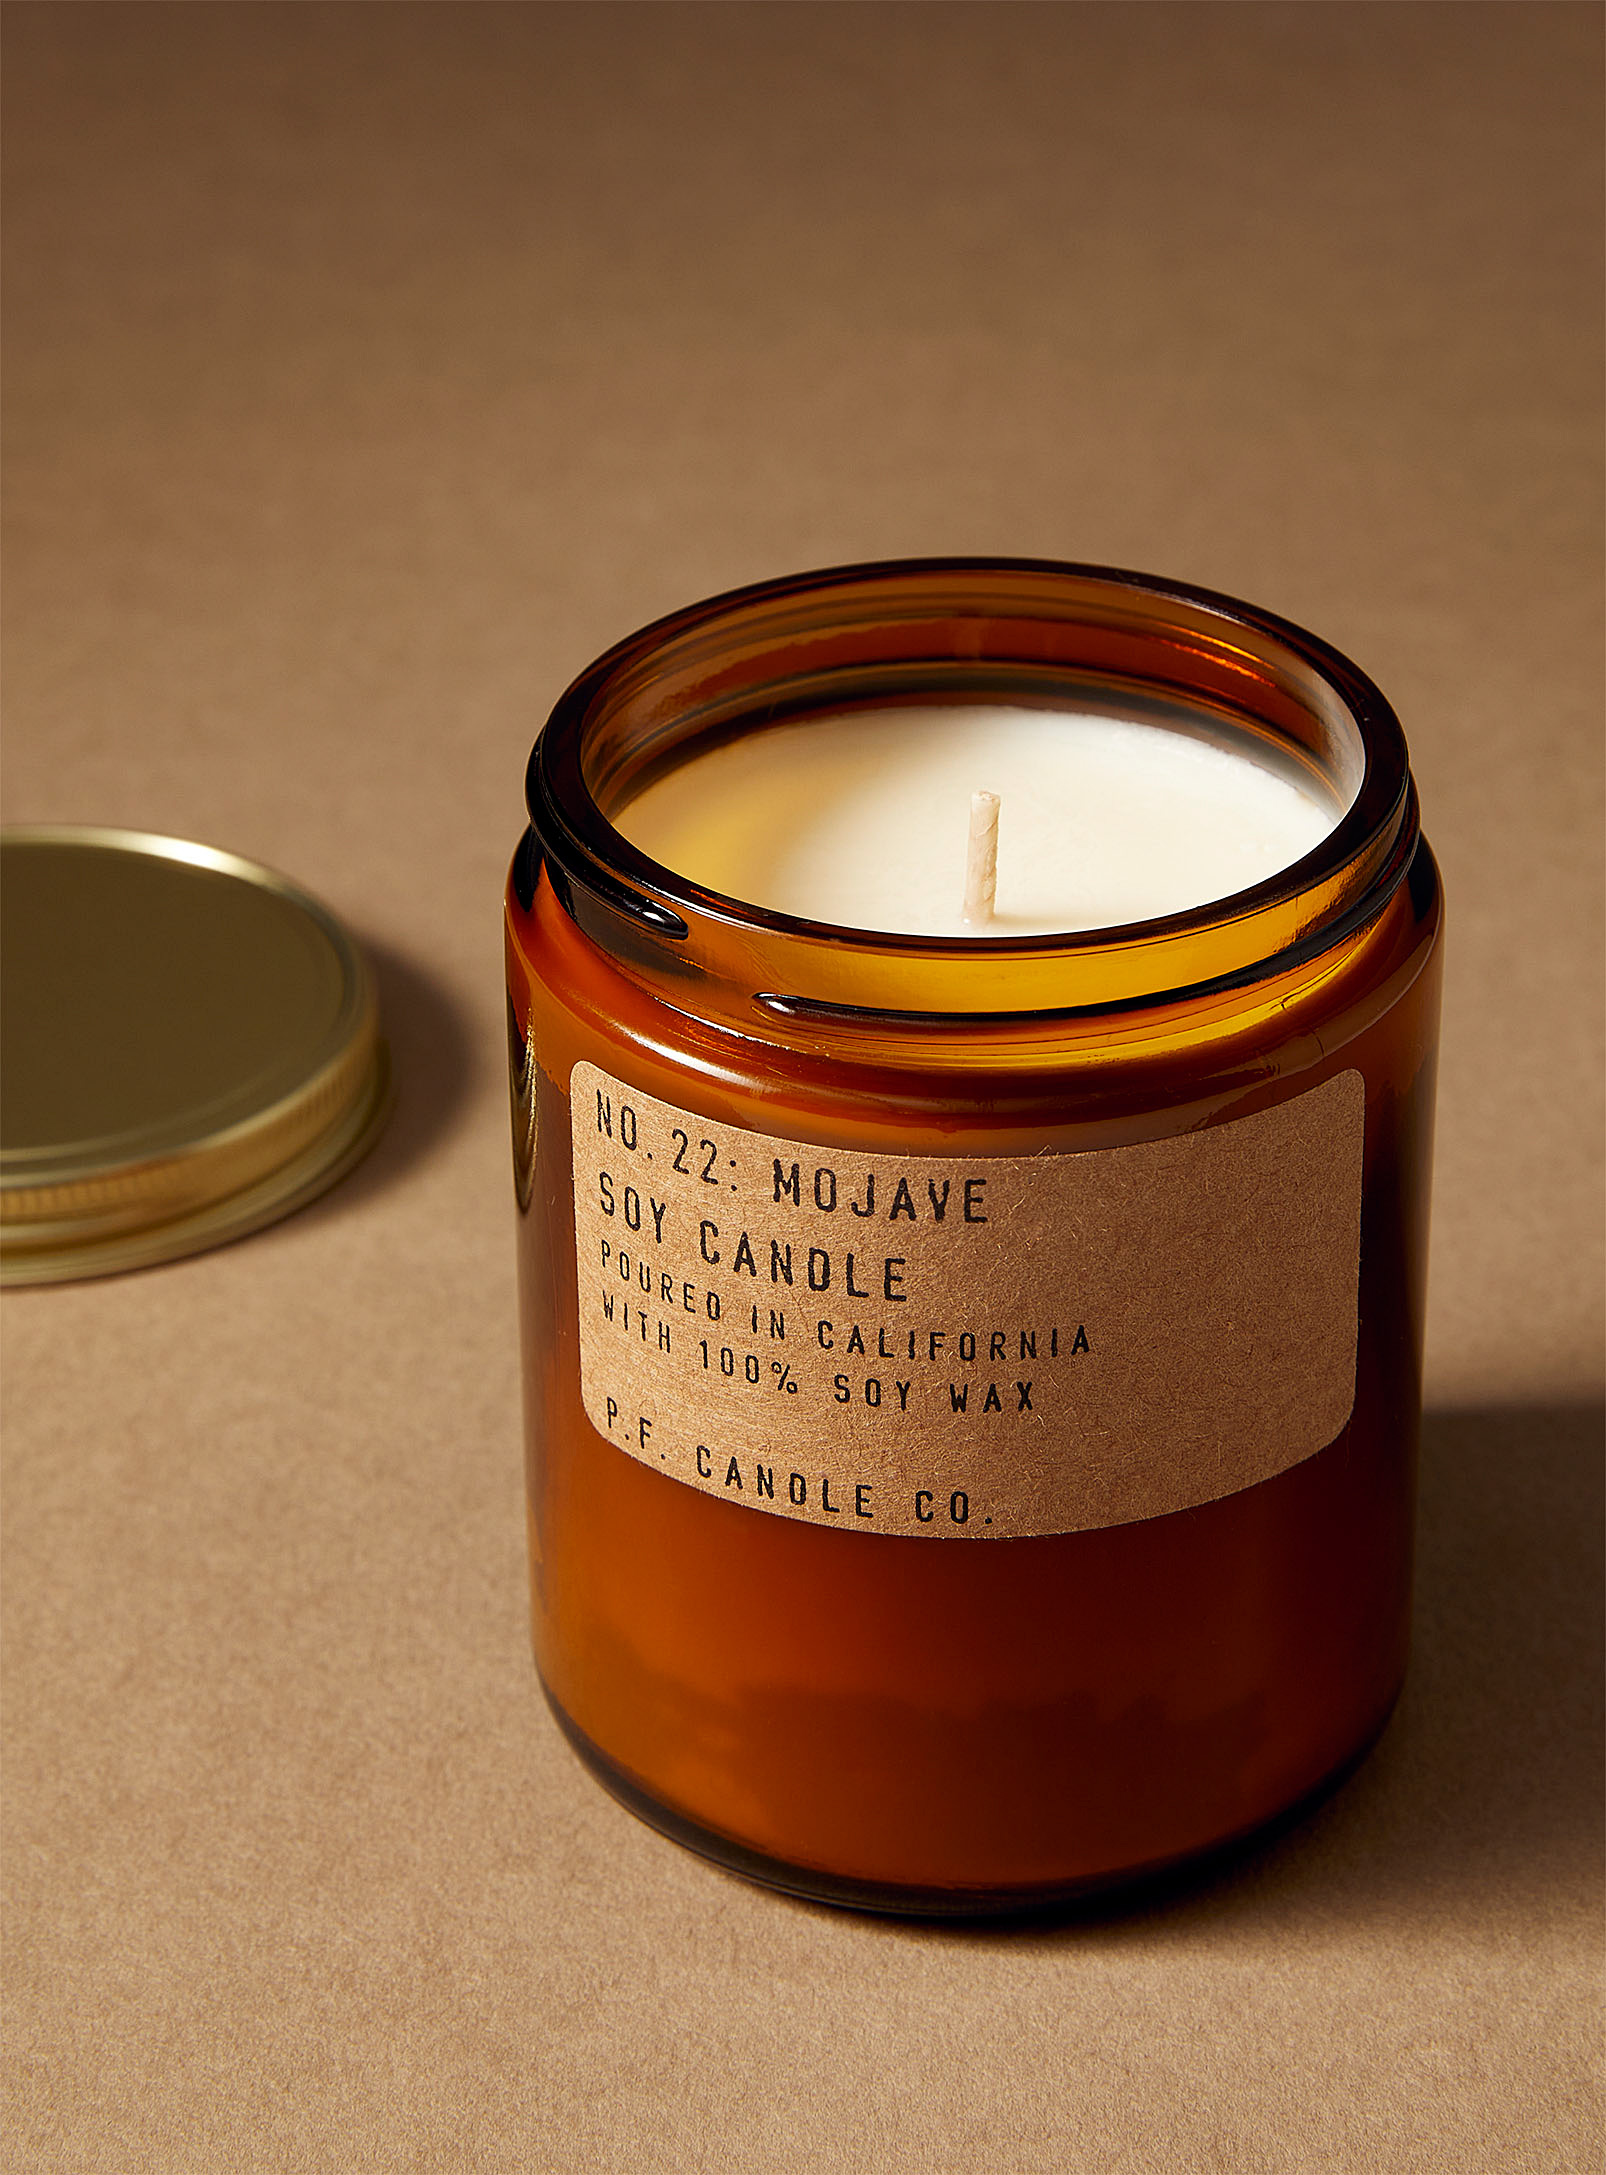 P.f Candle Co. Mojave Scented Candle In Brown